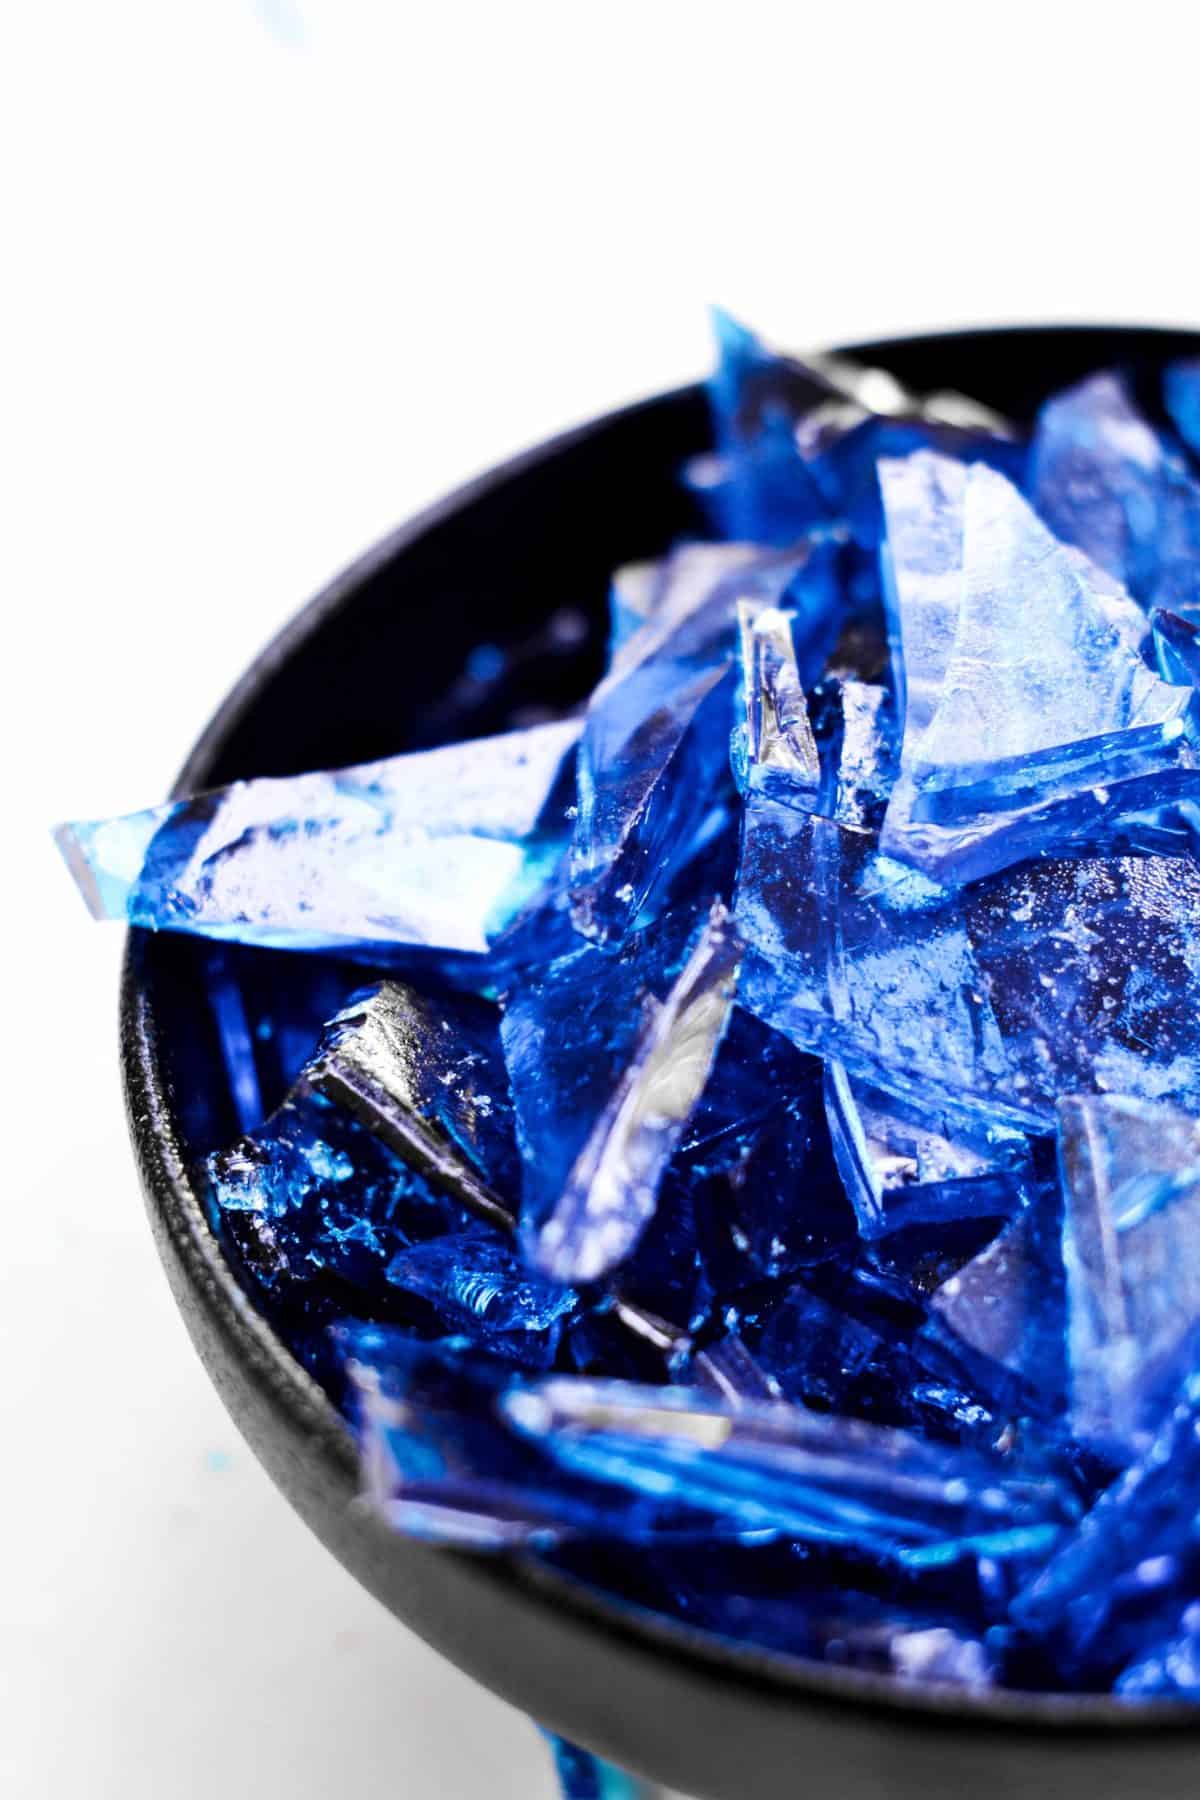 Make an Ice Ring, Ice Cups, or Ice Shards to Keep Punch Cool